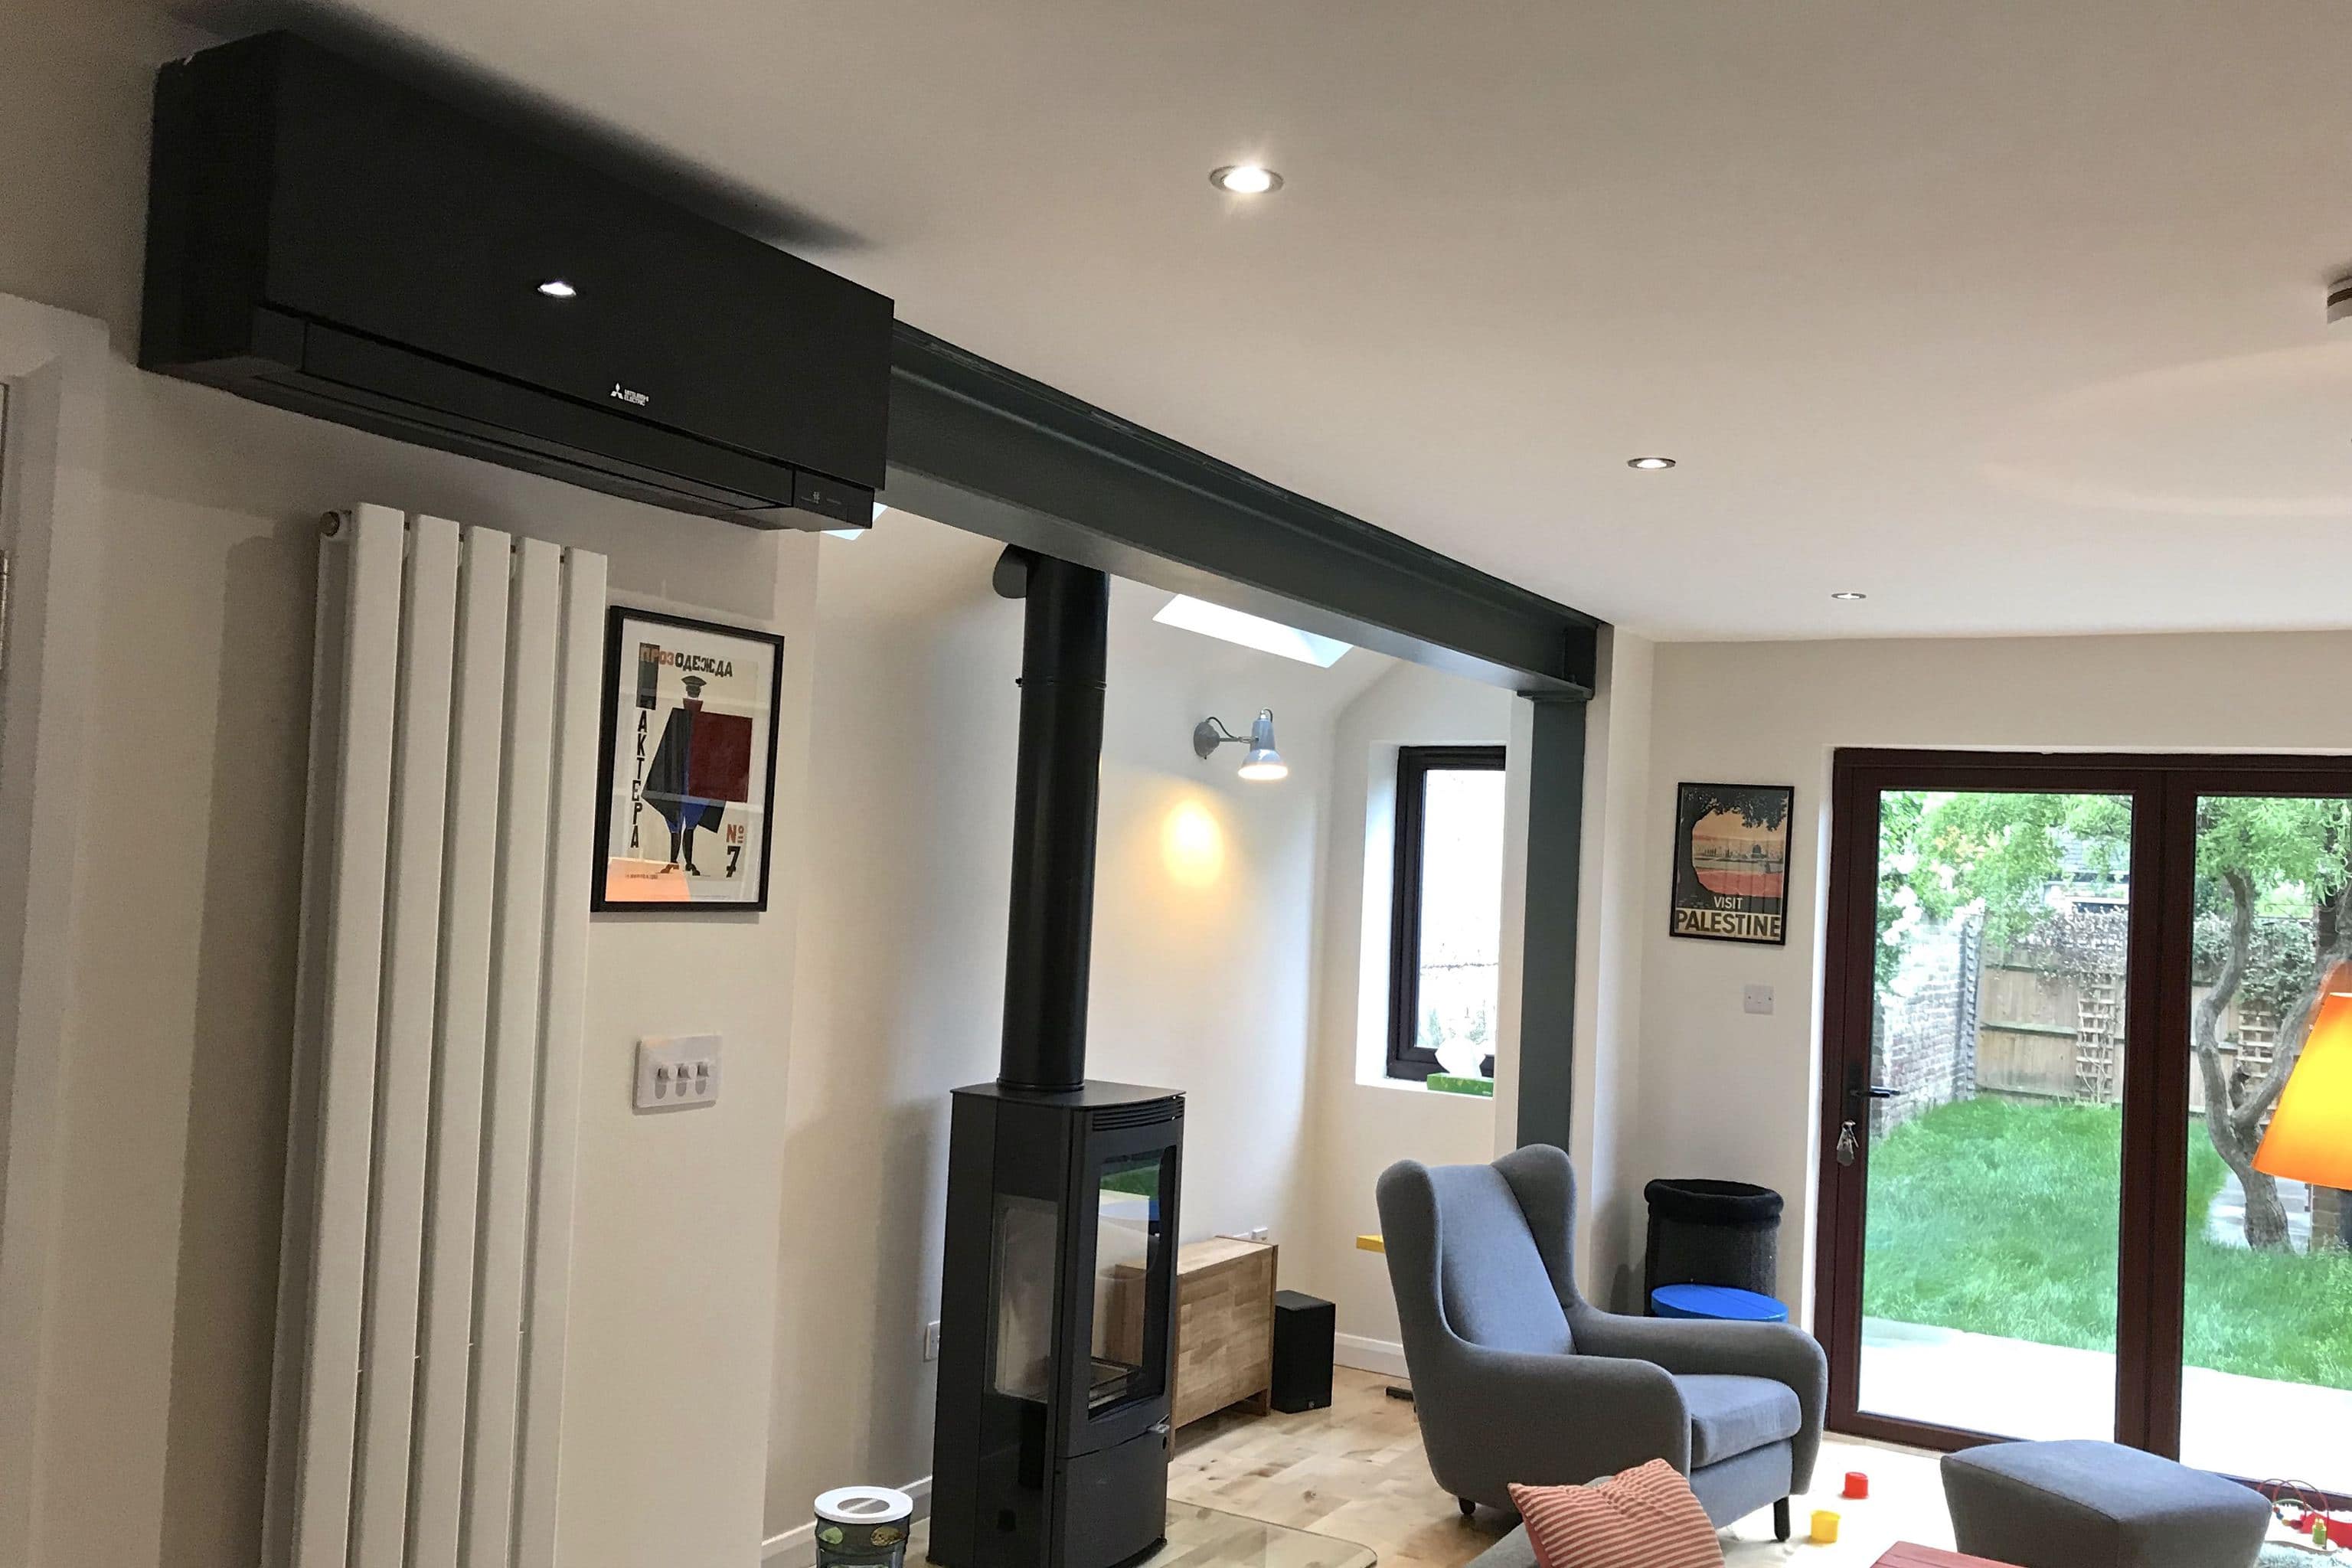 black wall mounted Mitsubishi Electric domestic air conditioning unit in living room